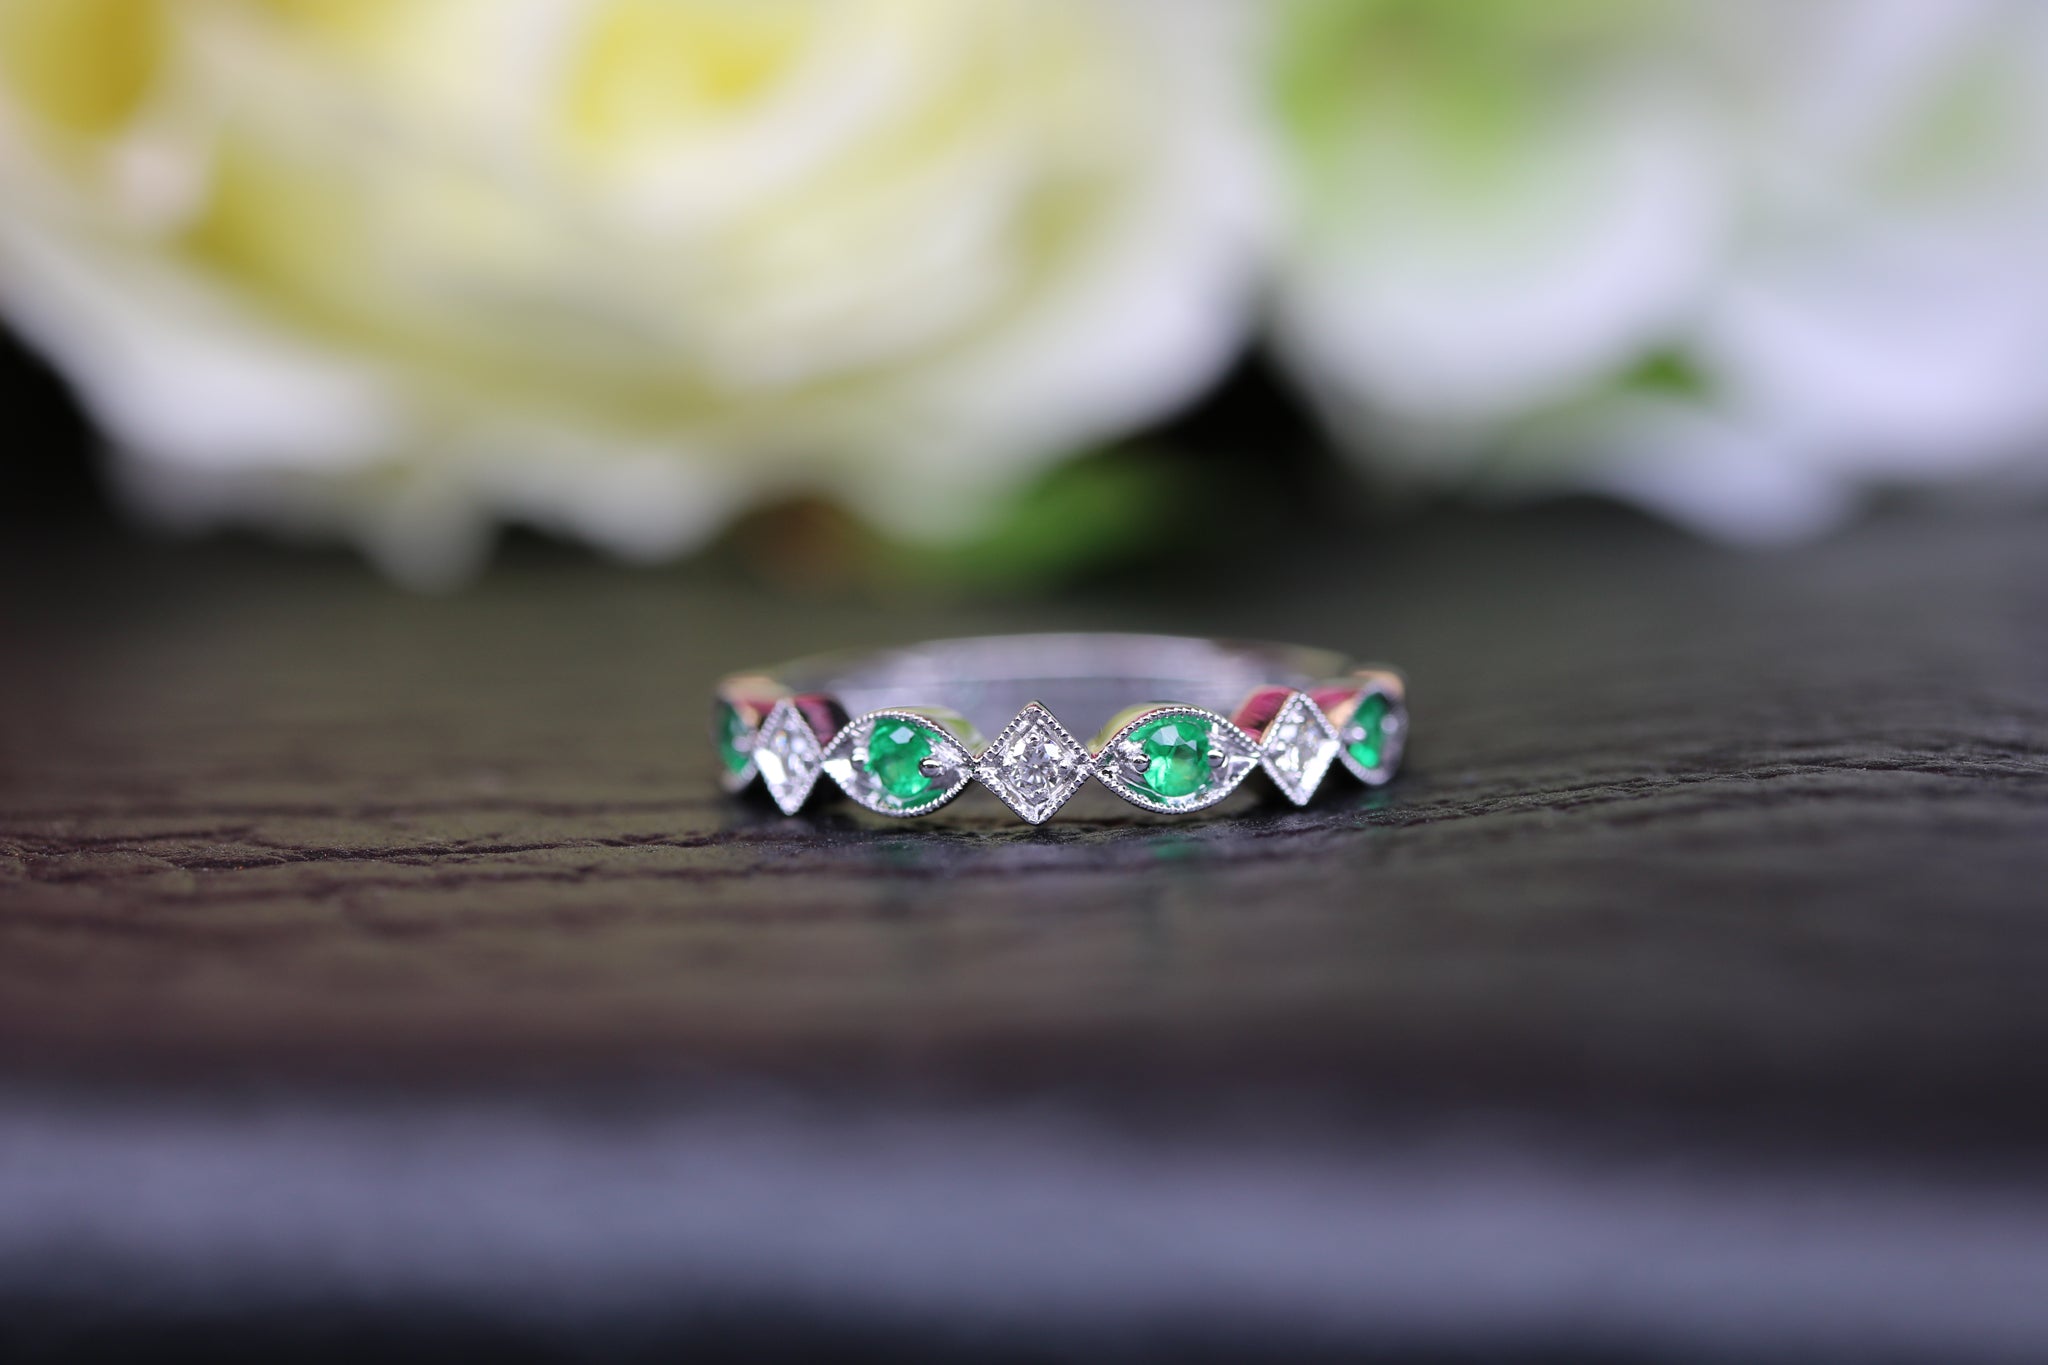 9ct White Gold Emerald & Diamond Ring - HJ2058 - Hallmark Jewellers Formby & The Jewellers Bench Widnes